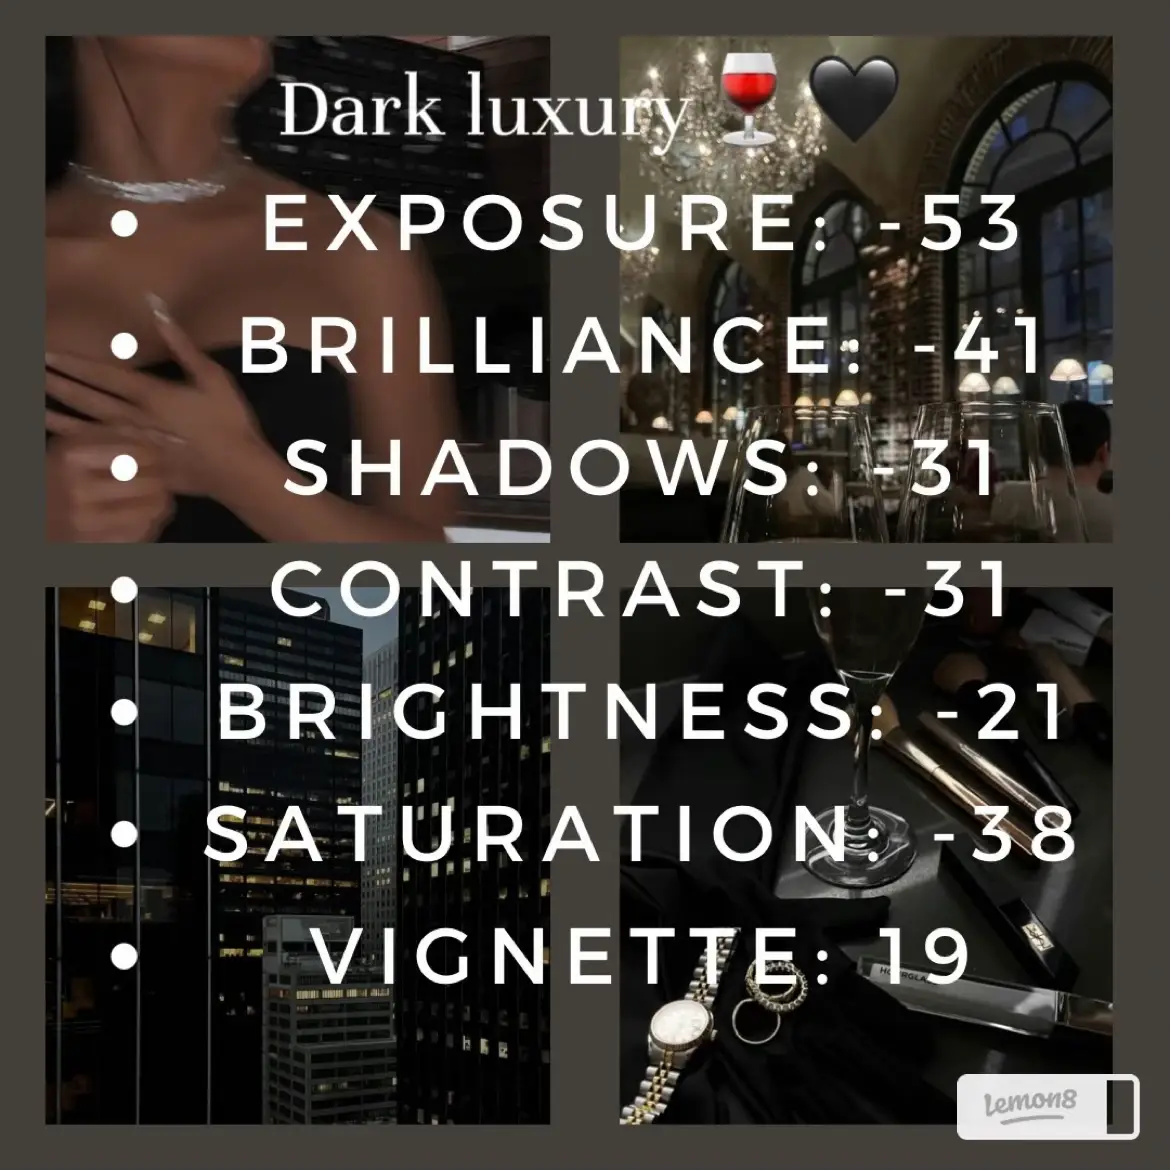  A collage of photos with the words "Dark luxury" and "Exposure